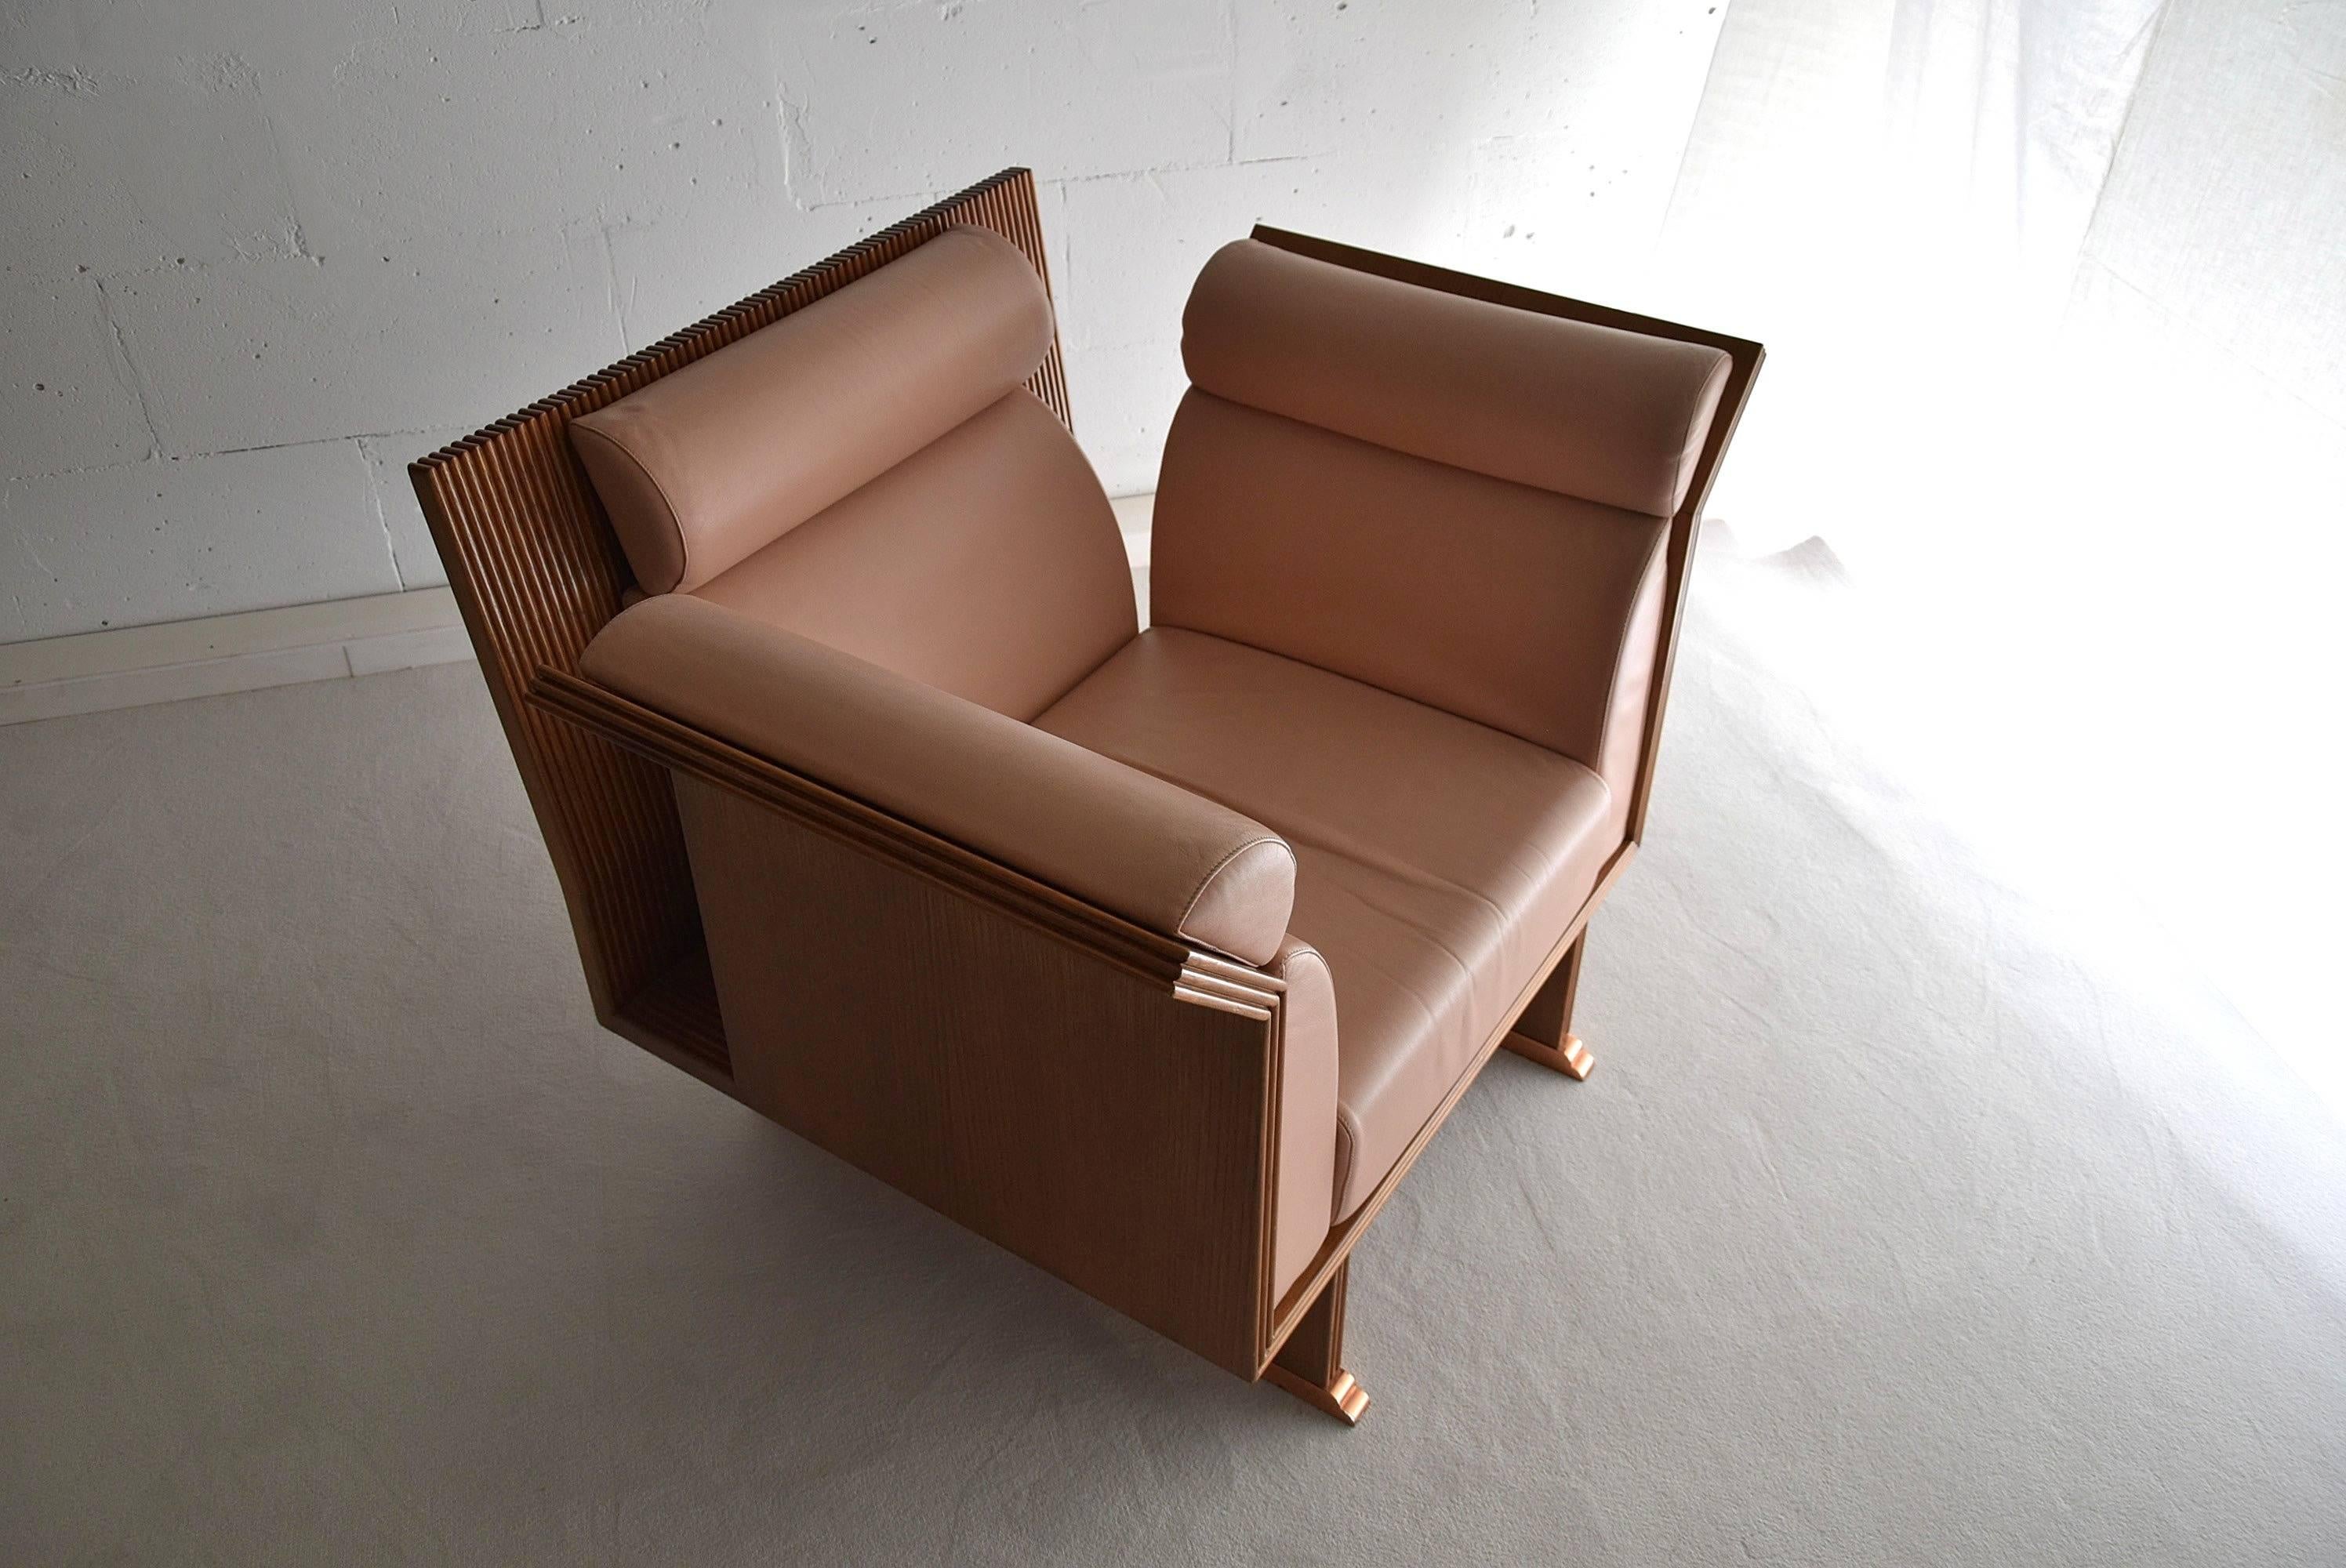 Neo eclectic Ugo La Pietra post modern Mahogany arm chairs
Poltrona pretenziosa pretentious very rare armchairs designed in 1983 by Ugo La Pietra and produced by Busnelli.
This model was part of a research on 